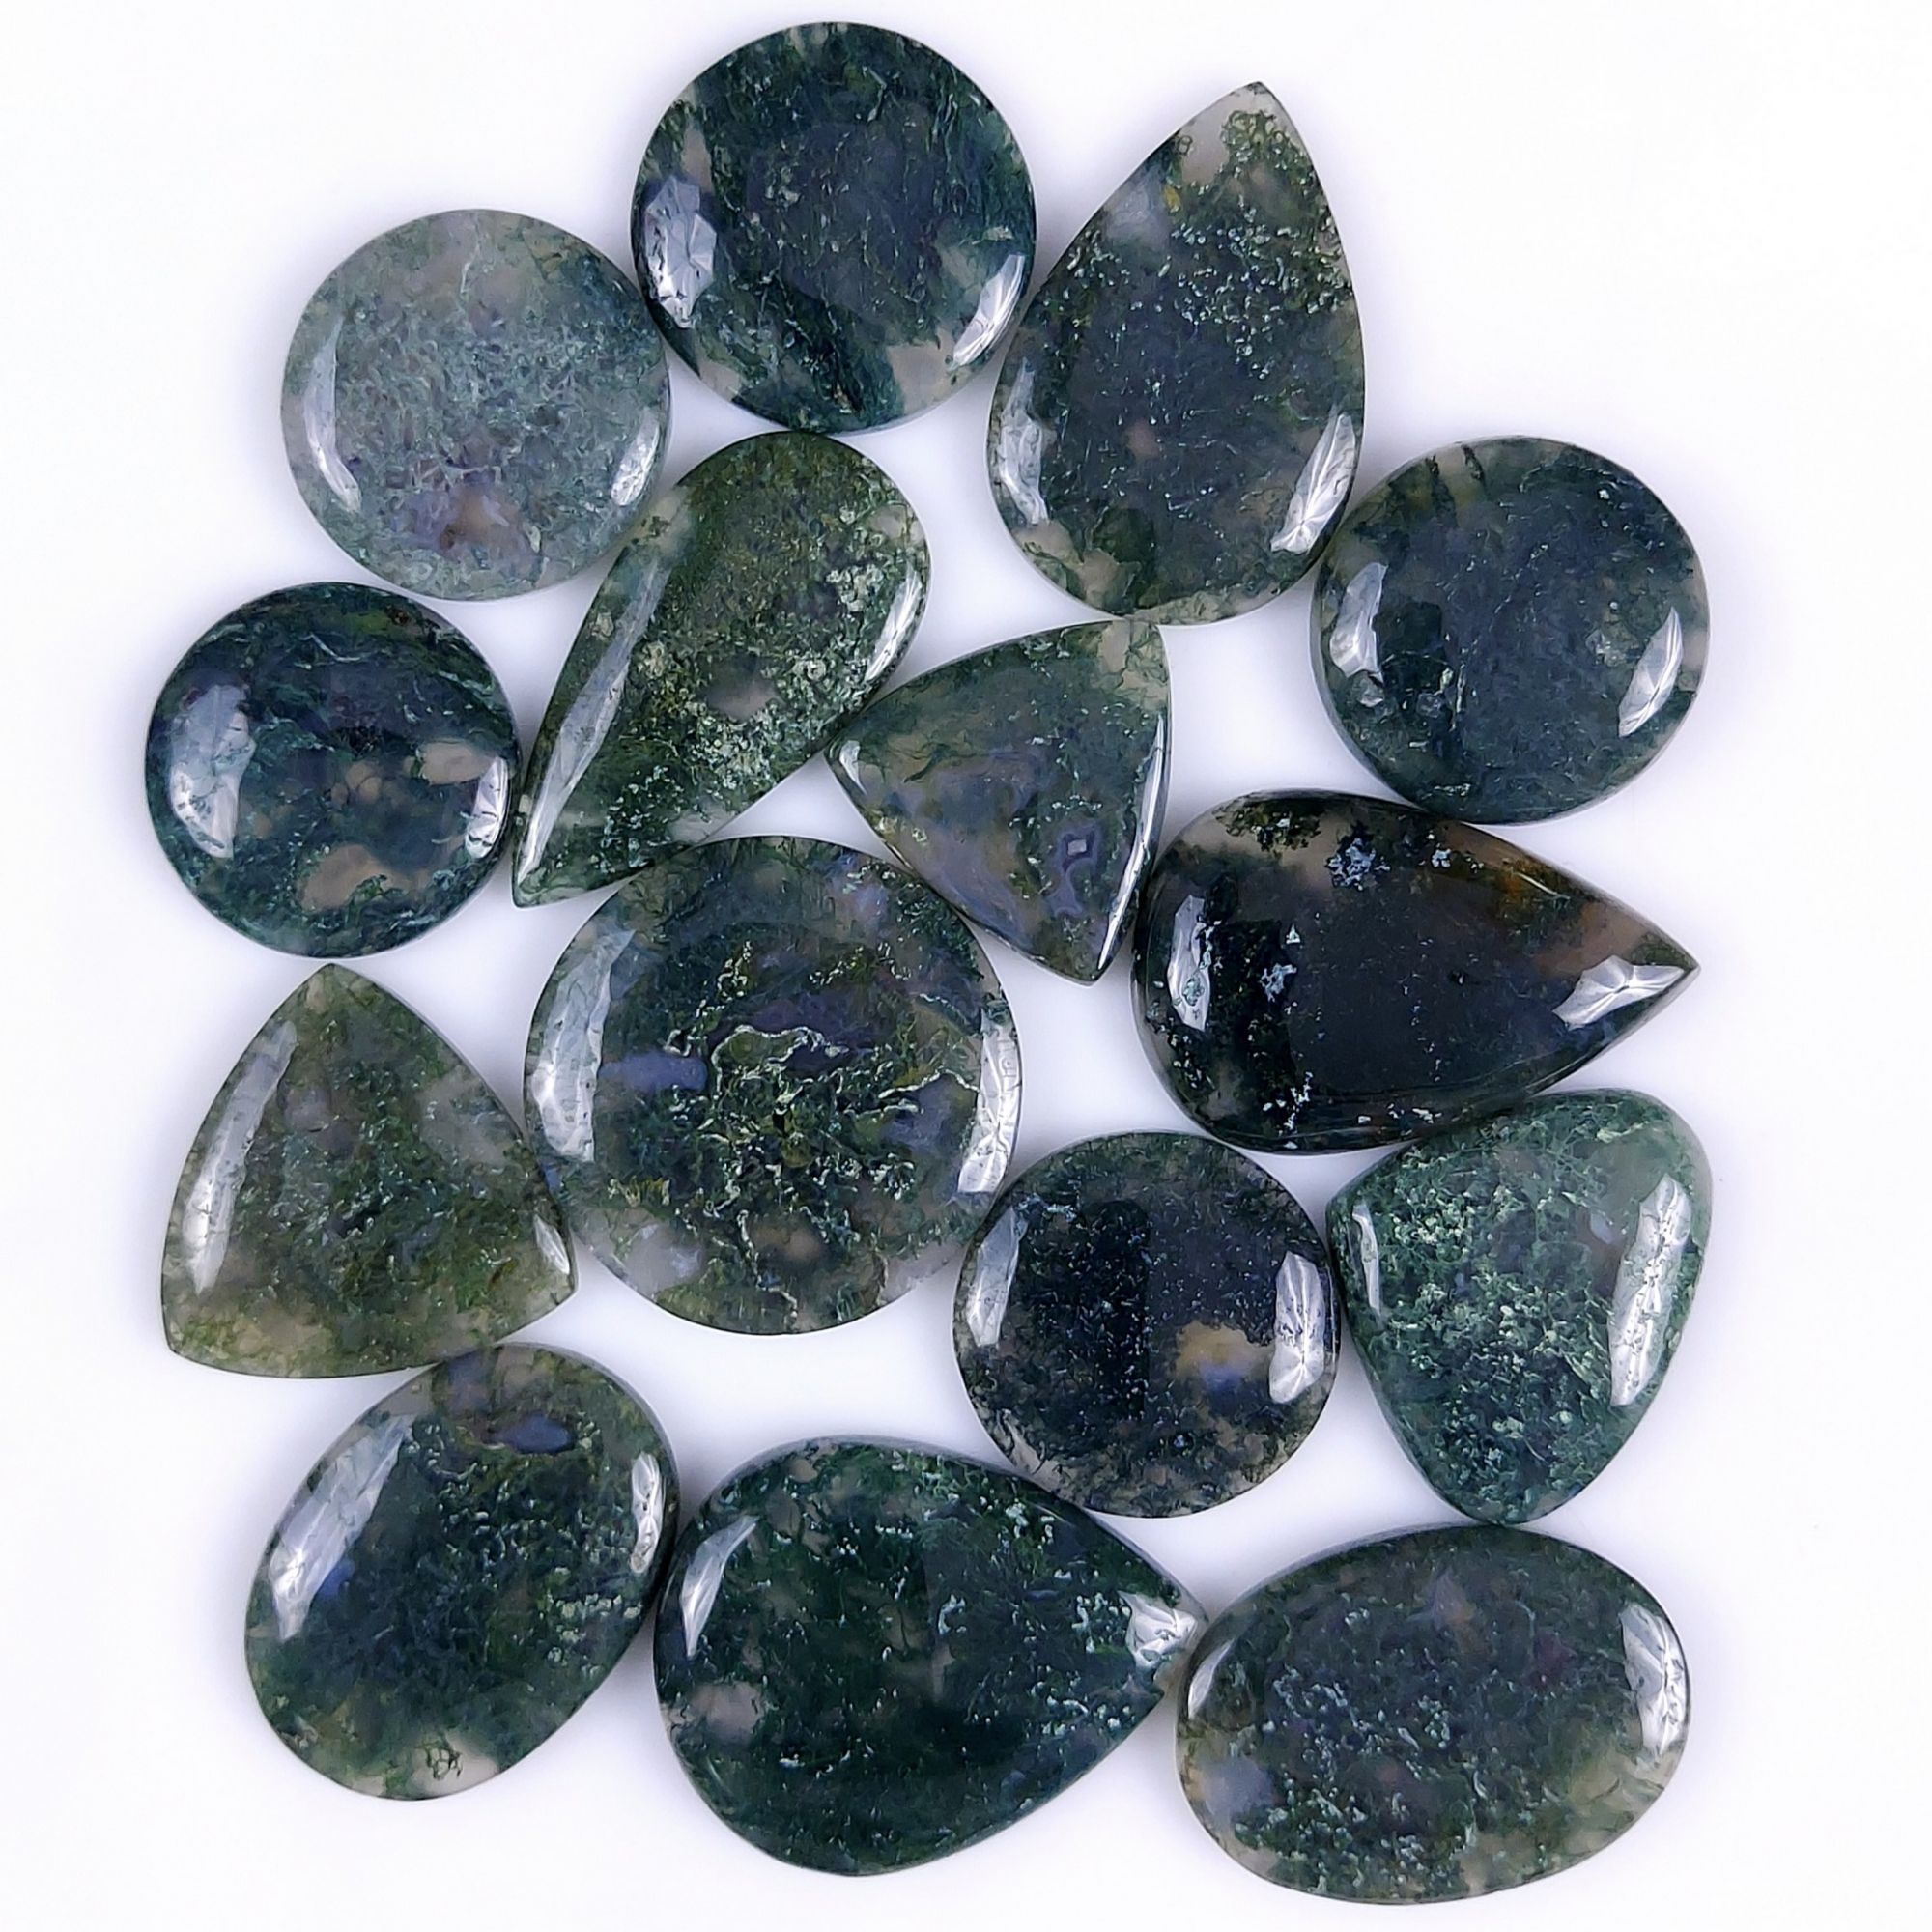 15Pcs 345Cts Natural Green Moss Agate Cabochon Lots Mixed Shapes And Sizes Moss Agate loose gemstone Cabochon Wholesale Lot 30x18 18x18mm#G-369